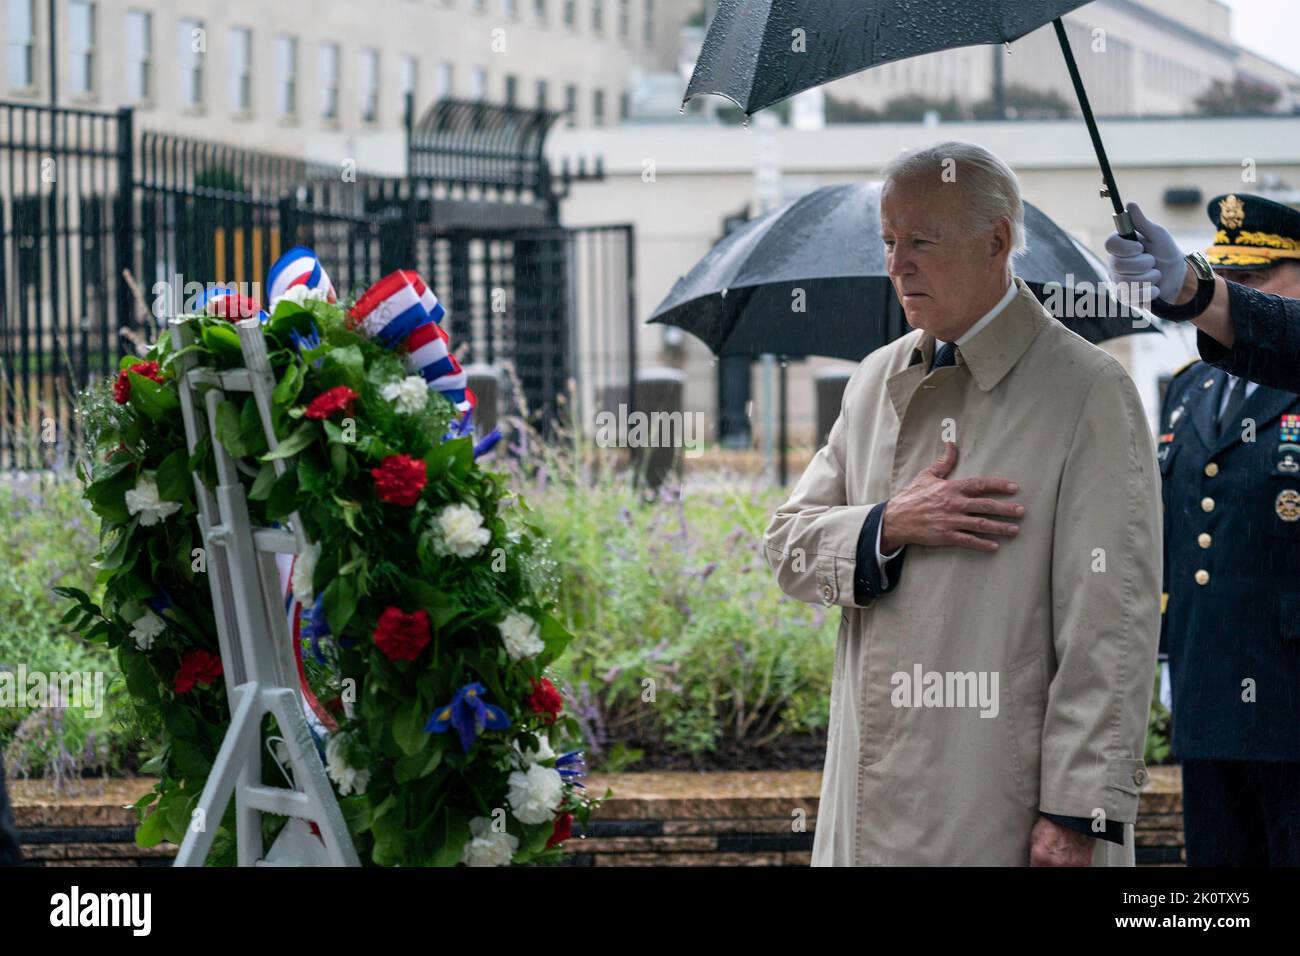 Washington, United States of America. 11 September, 2022. U.S President Joe Biden, salutes after placing a wreath at the National 9/11 Pentagon Memorial during a ceremony remembering the victims of the attacks, September 11, 2022 in Arlington, Virginia. The nation marked the 21st anniversary of the al-Qaida terrorists attacks that killed nearly 3,000 people.  Credit: Adam Schultz/White House Photo/Alamy Live News Stock Photo